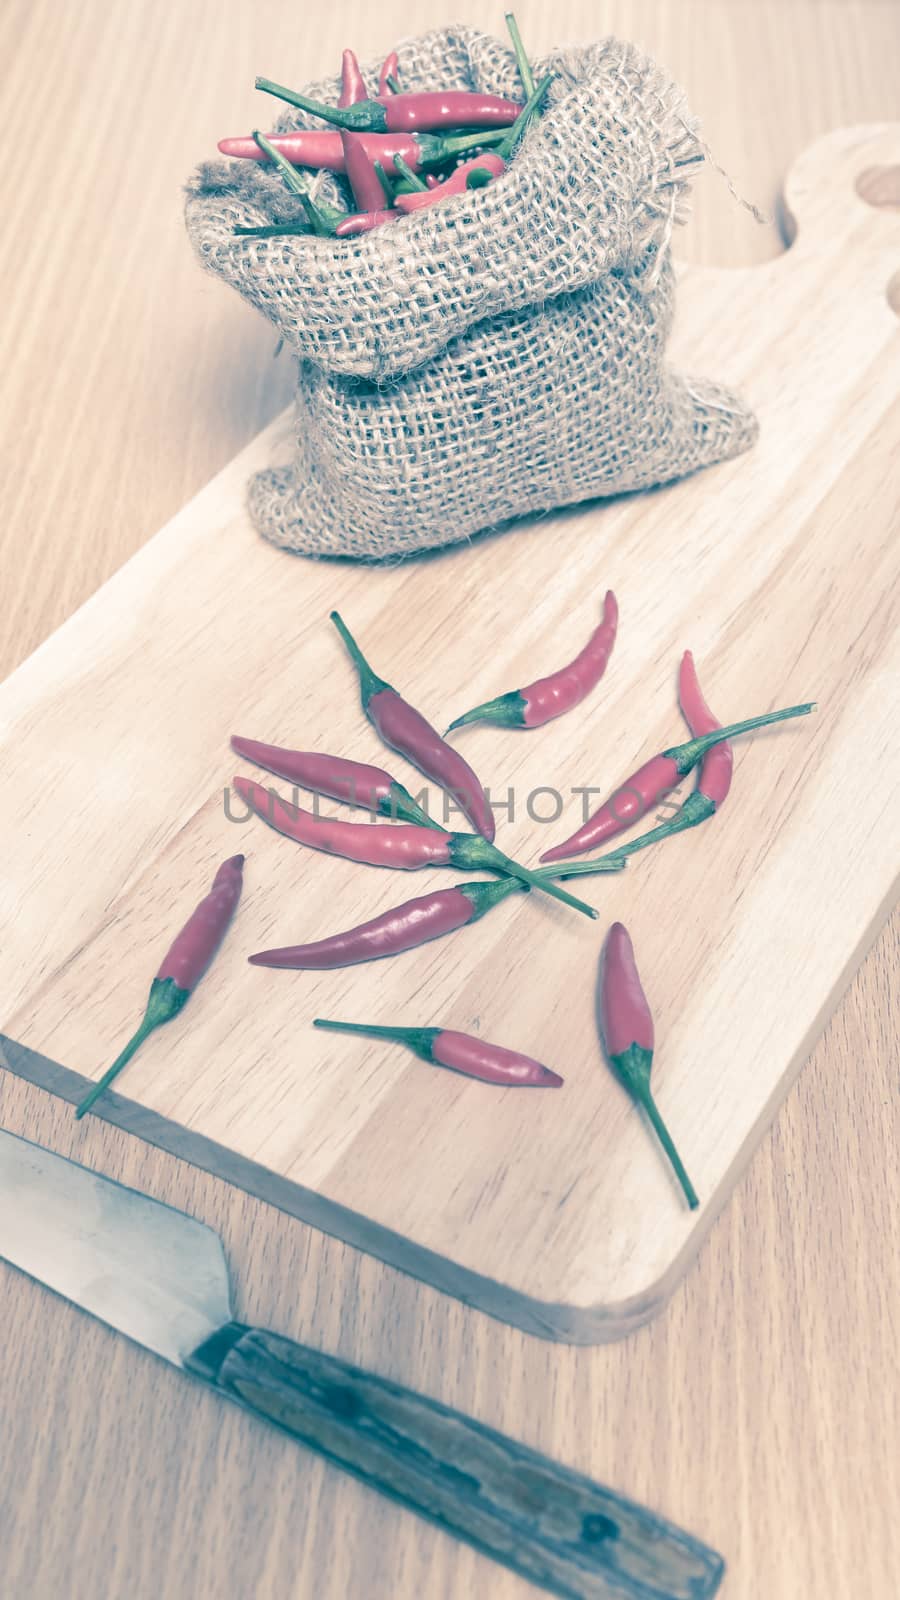 red chili peppers on cutting board over wood table background vintage style